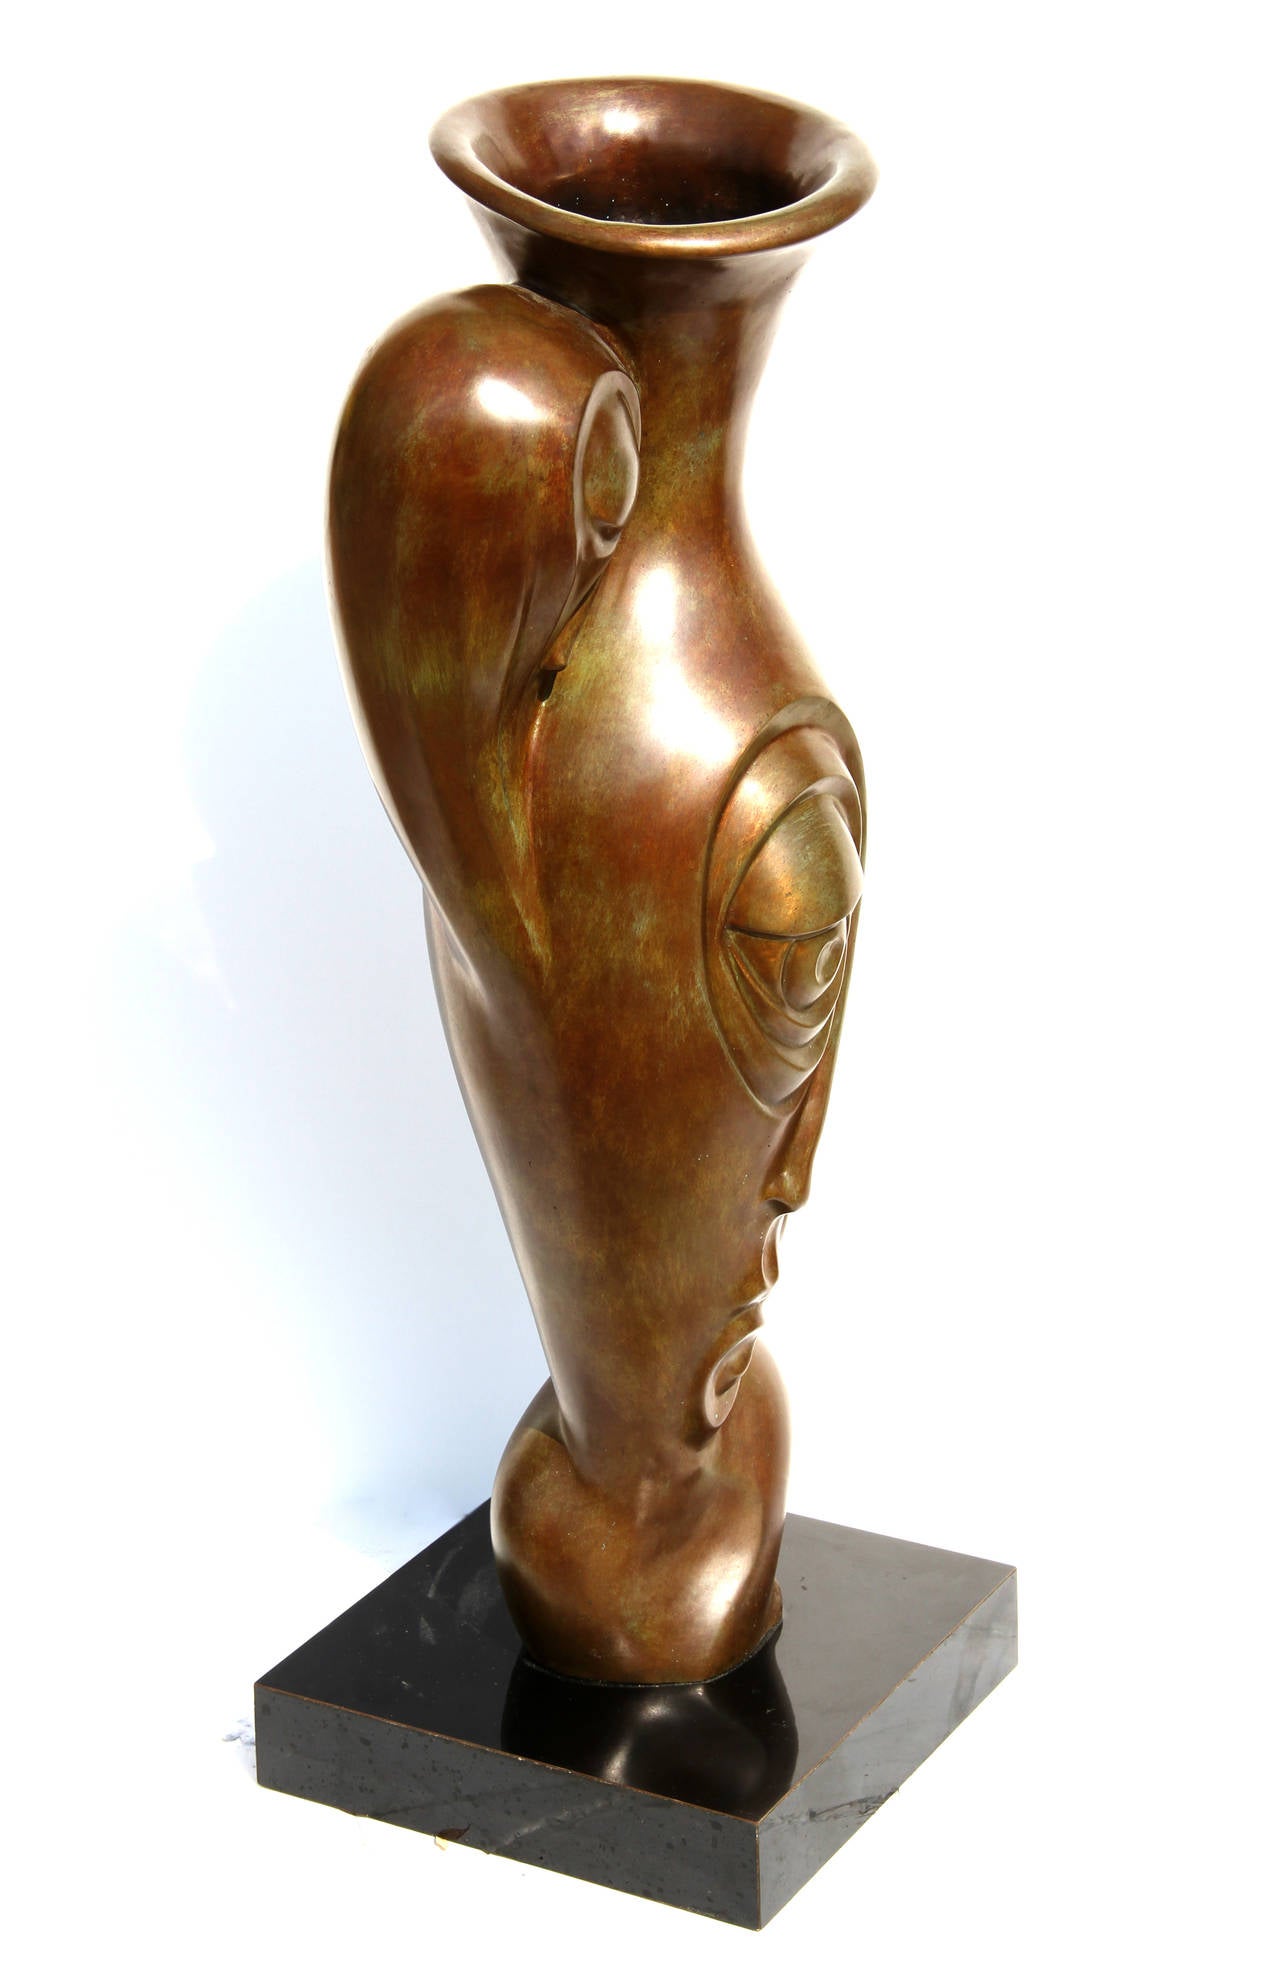 Artist: Unknown, possibly Russian
Title: Profile Pitcher
Medium: Bronze Sculpture with Patina
Size: 26.5 in. x 9 in. x 5 in. (67.31 cm x 22.86 cm x 12.7 cm) Base: 2.5 x 10.5 x 10.5 inches